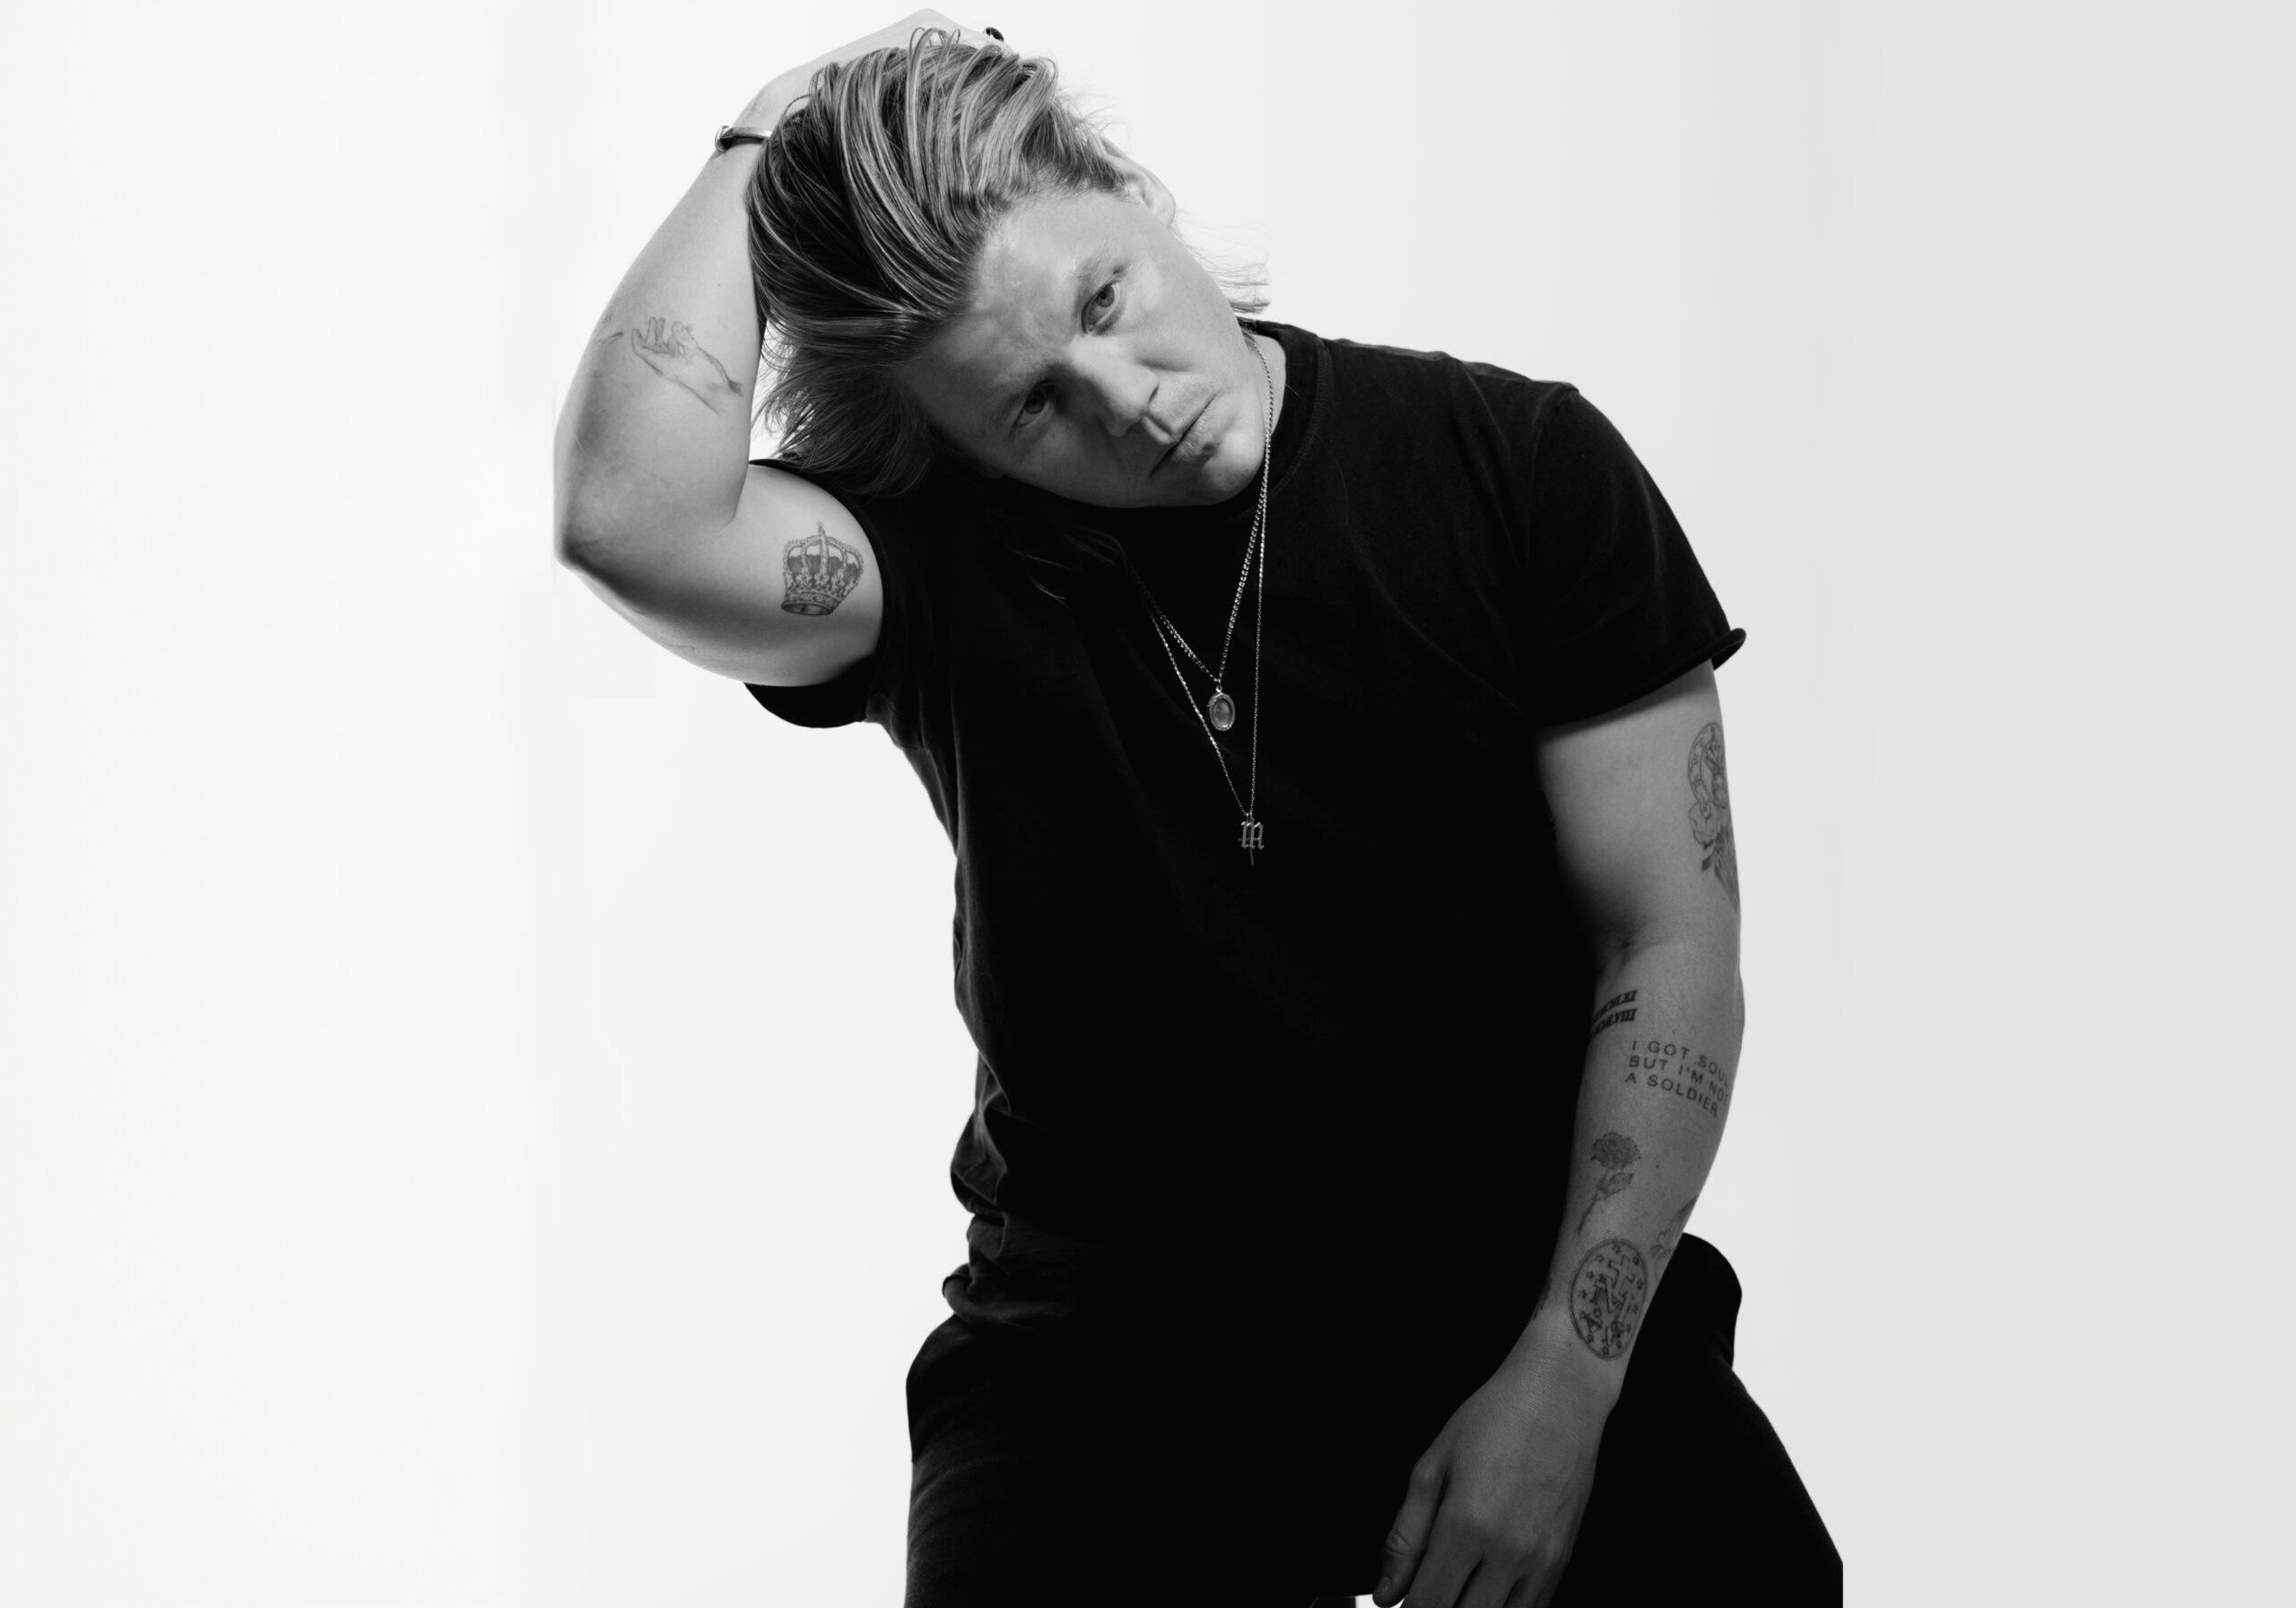 CONRAD SEWELL RELEASES UPLIFTING NEW SINGLE ‘ALL LIFE LONG’